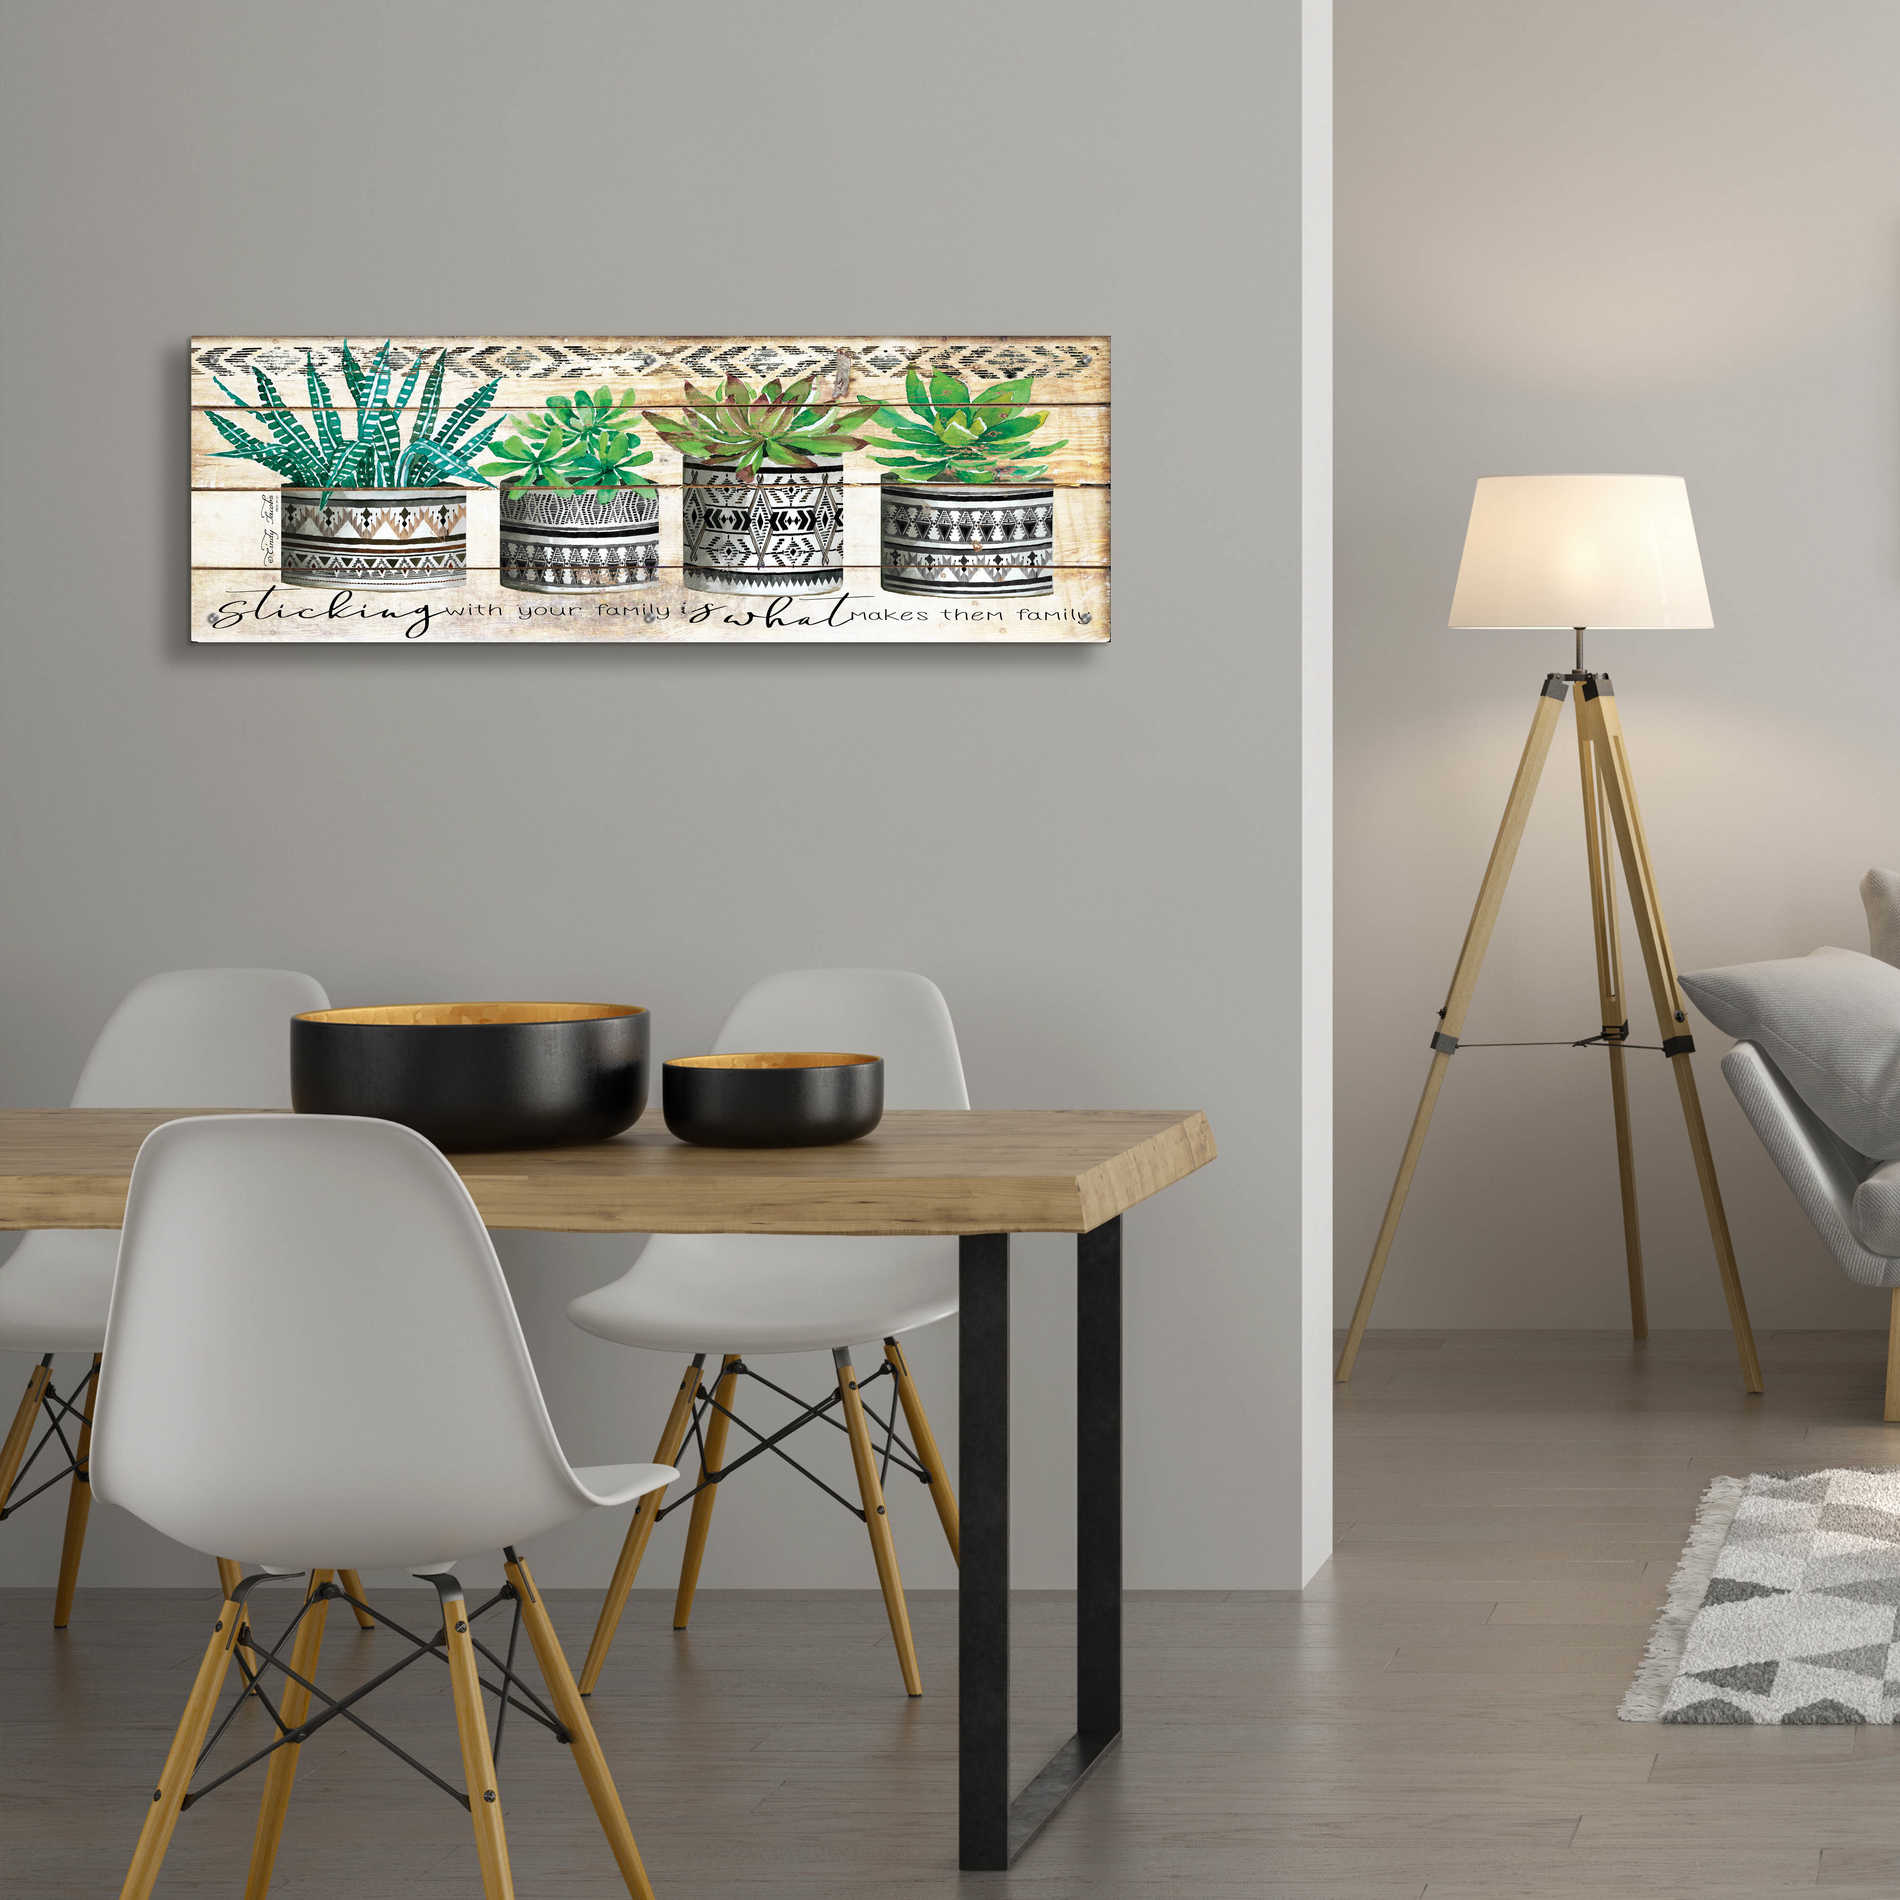 Epic Art 'Sticking with Your Family' by Cindy Jacobs, Acrylic Glass Wall Art,48x16